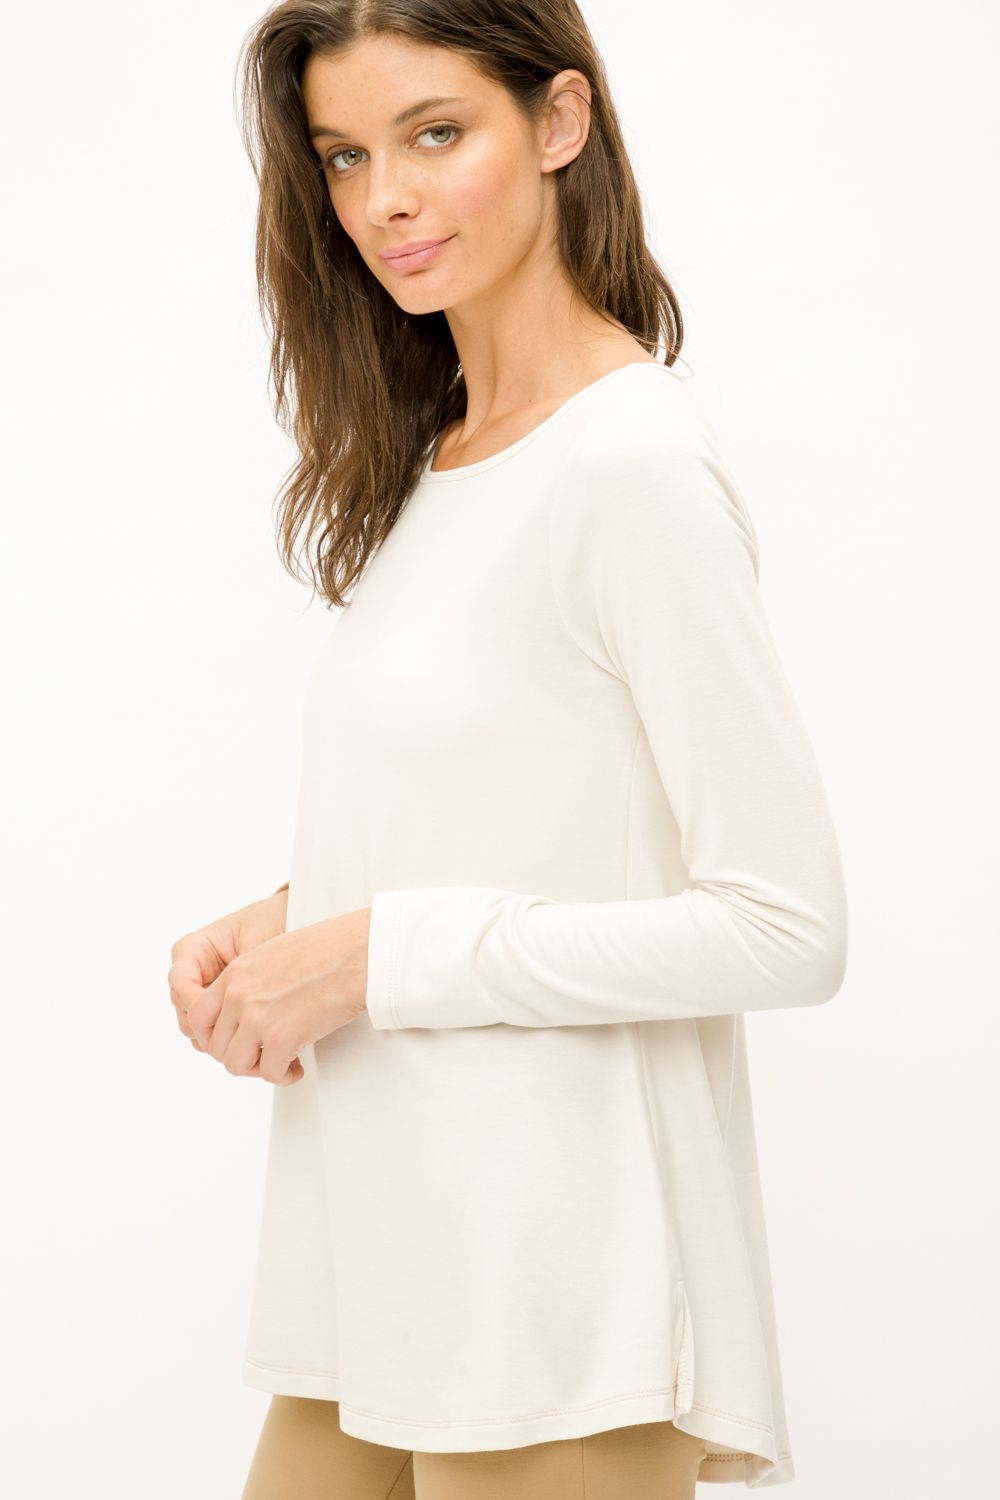 French Terry Scoop Neck Gored Tunic